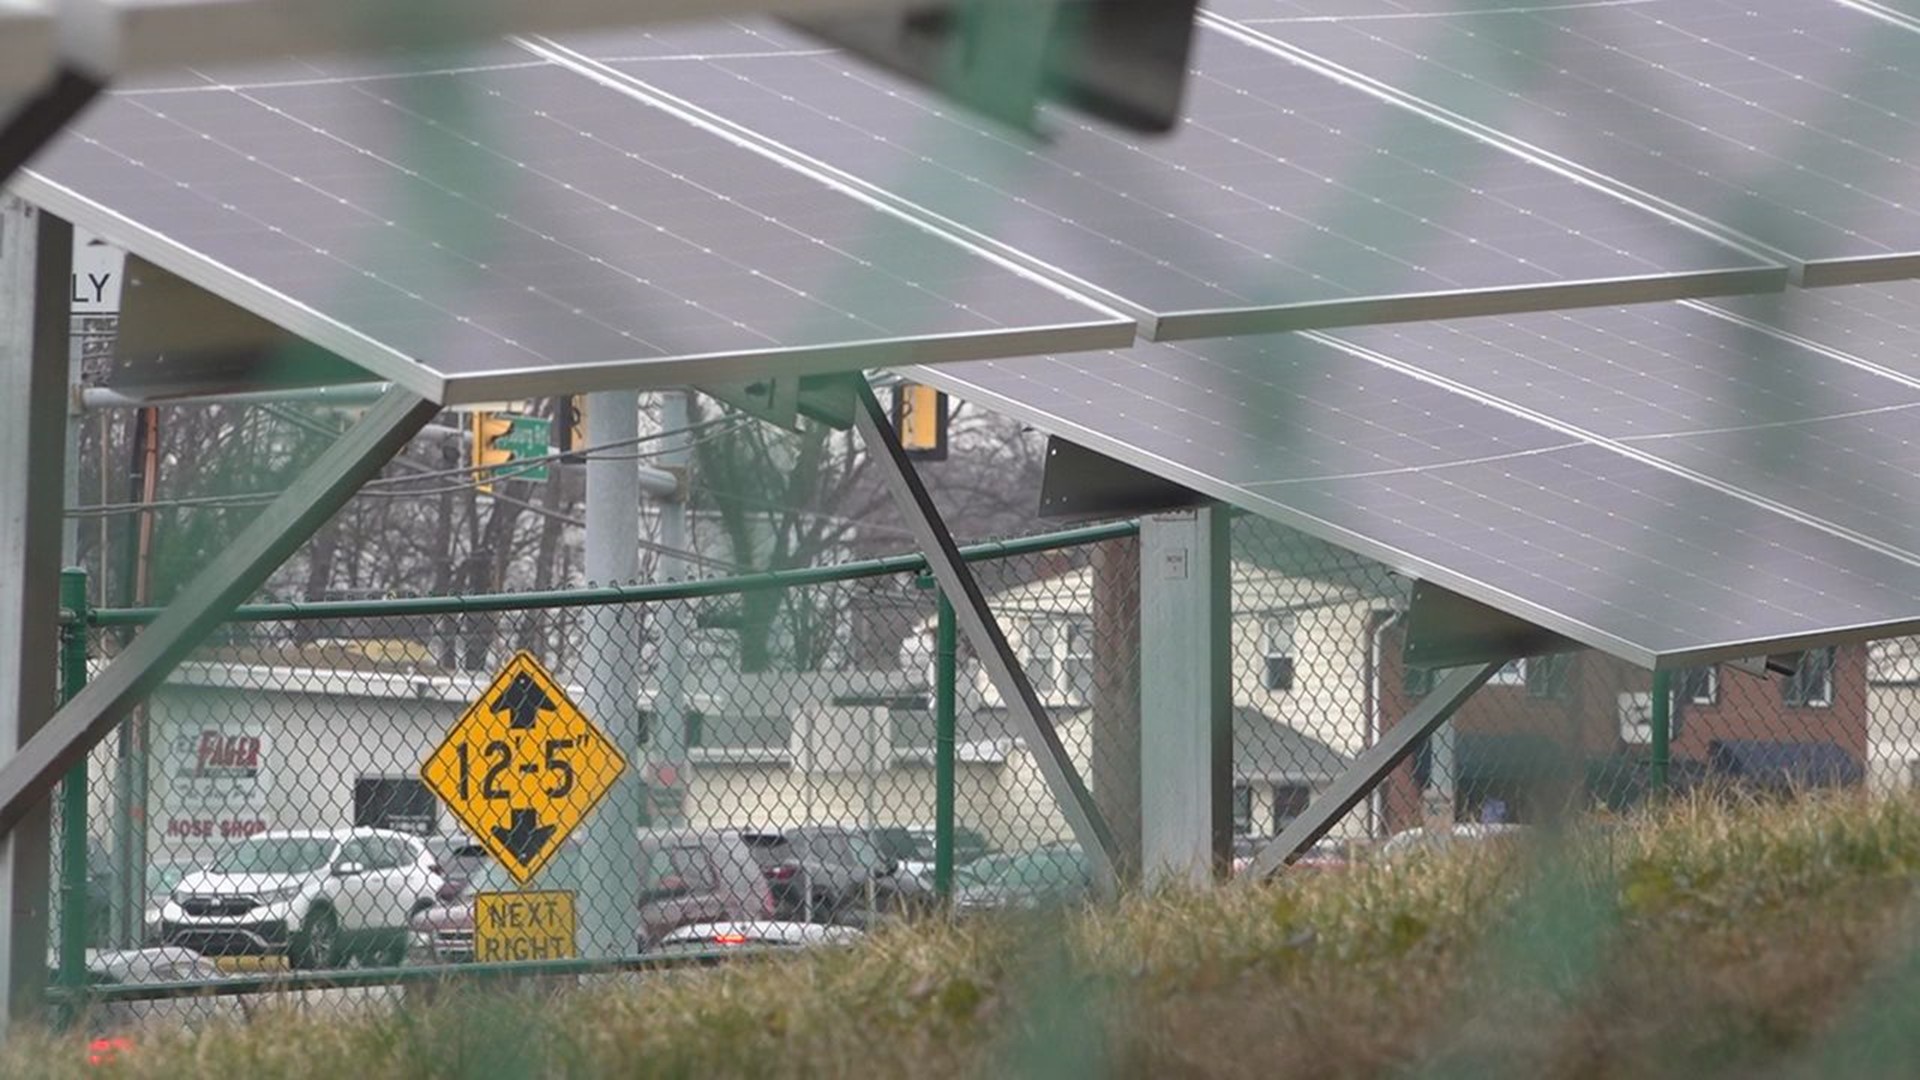 Township officials say they're close to hitting their goals, as state lawmakers look to push Pennsylvania in the direction of renewable energy.